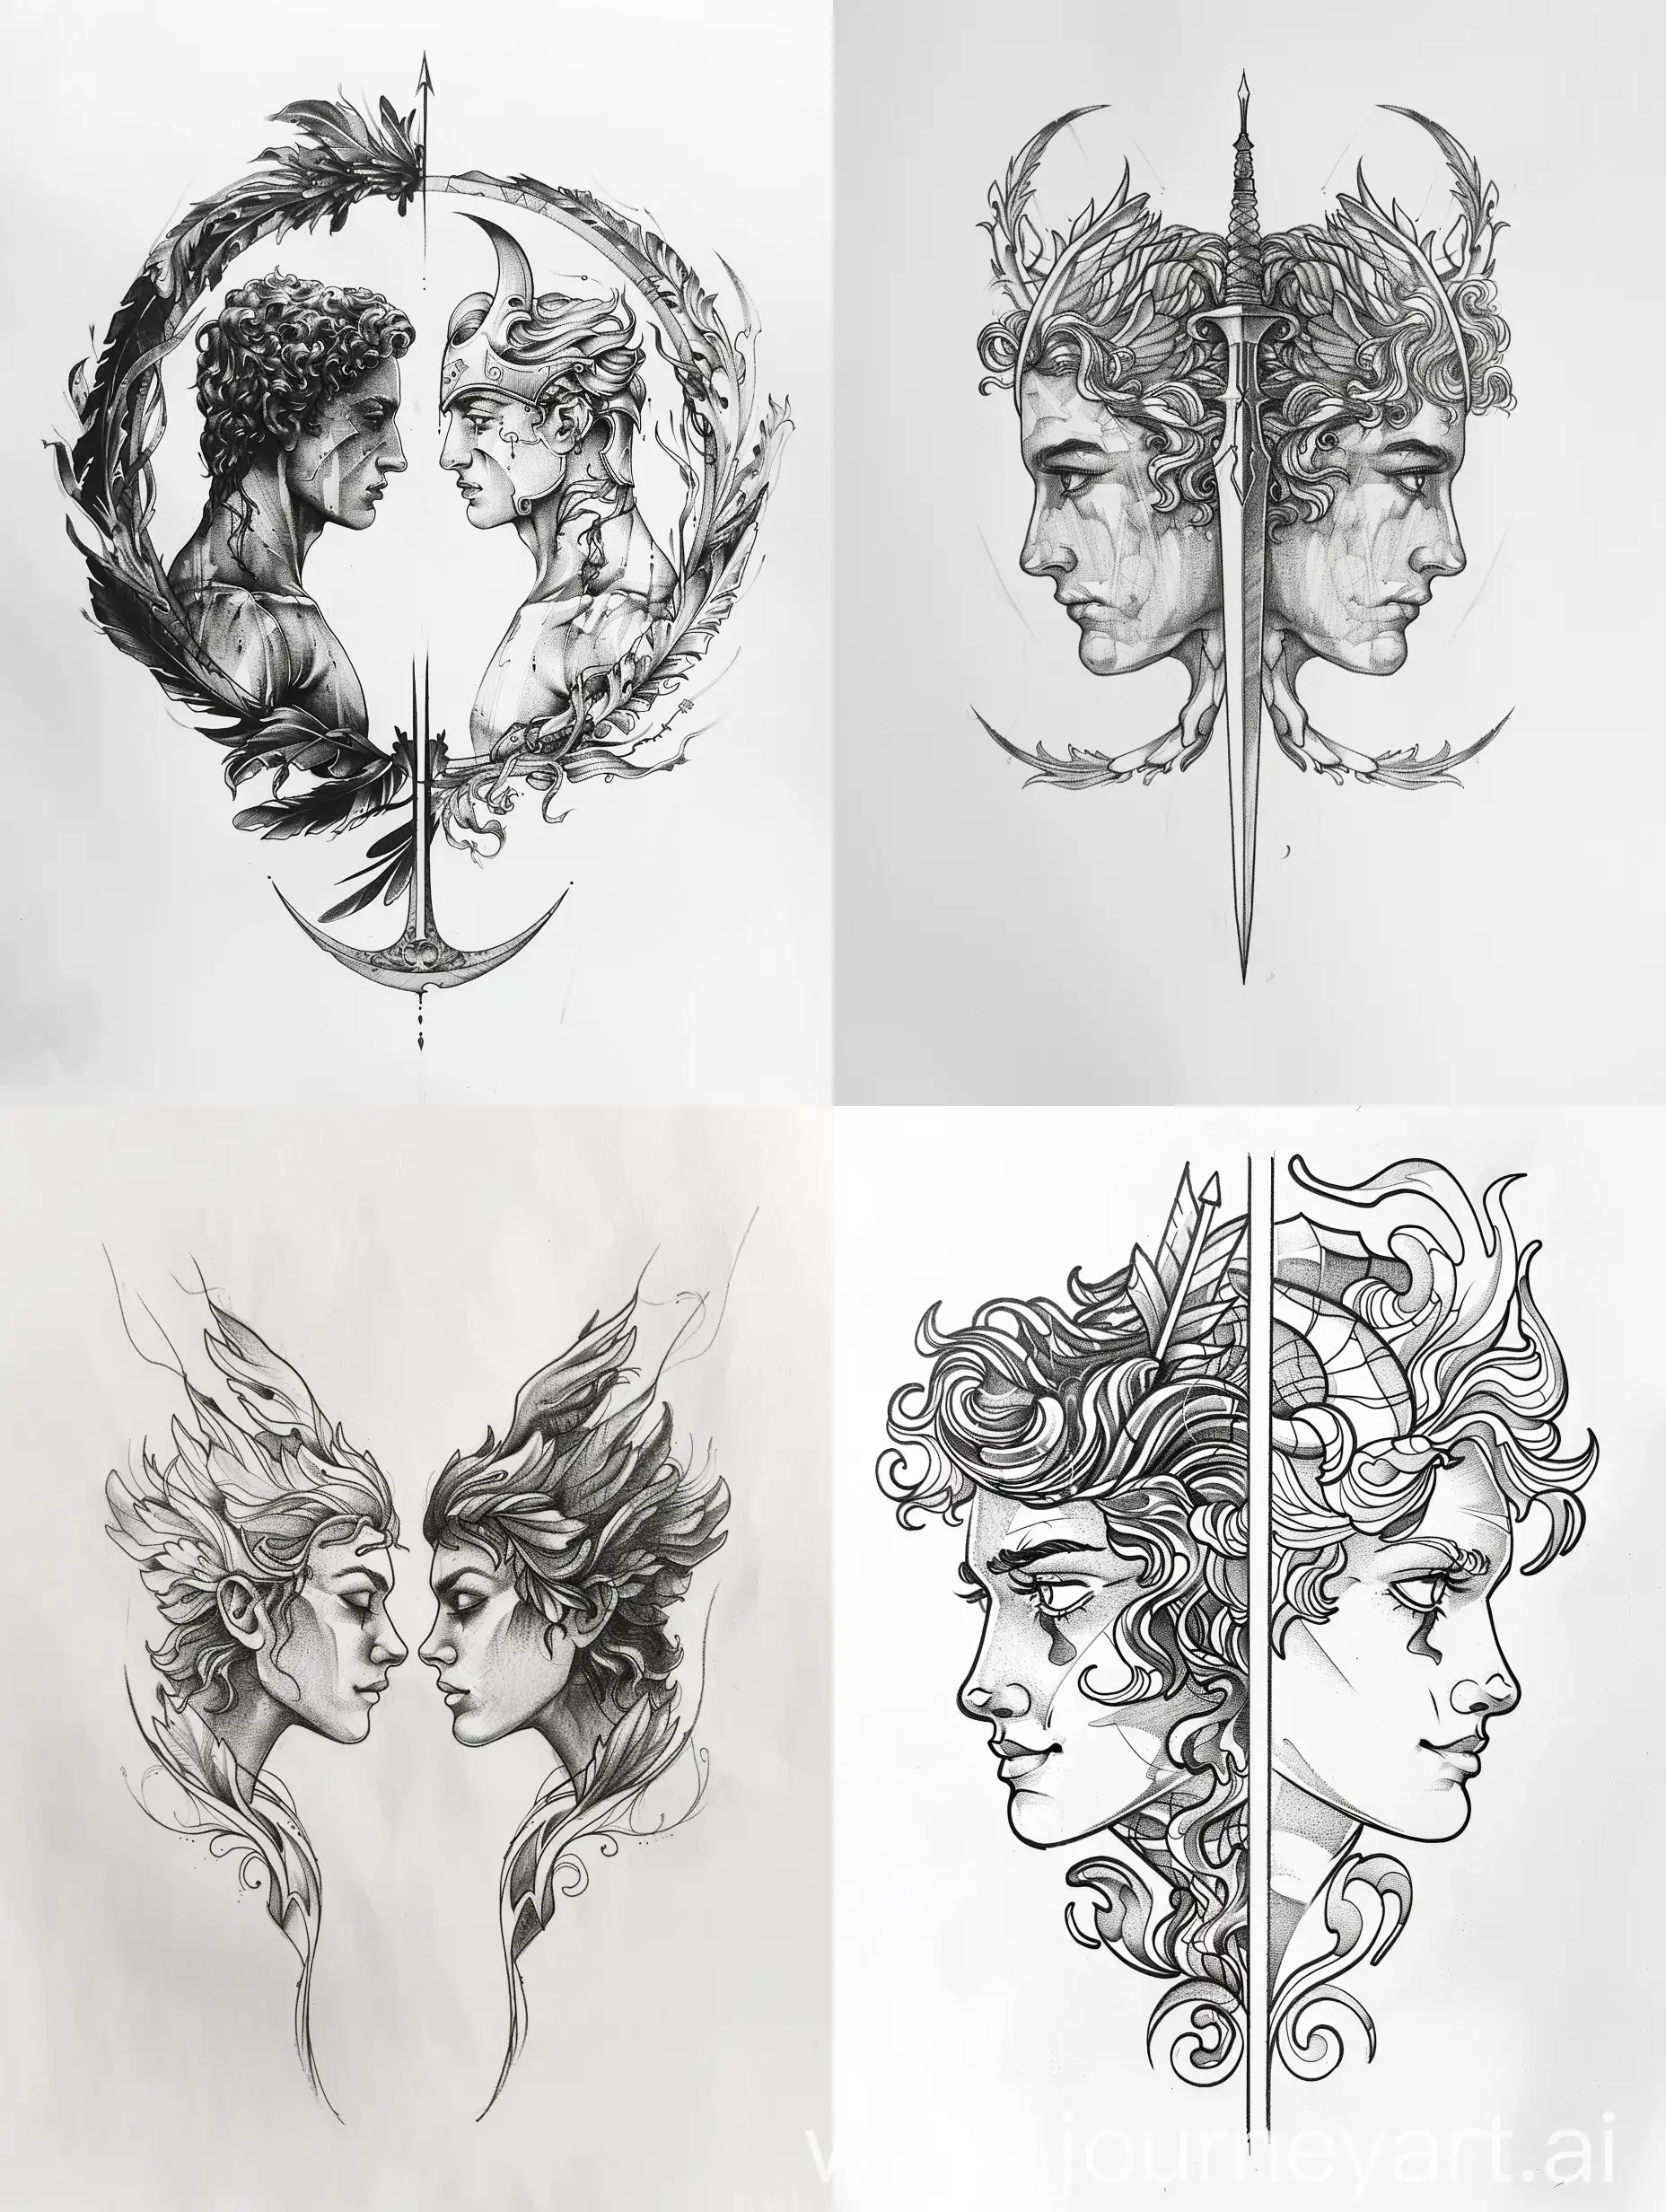 Symmetrical-Minimalist-Greek-Mythology-Sketch-Apollo-and-Artemis-Twins-Representing-Good-and-Evil-on-White-Background